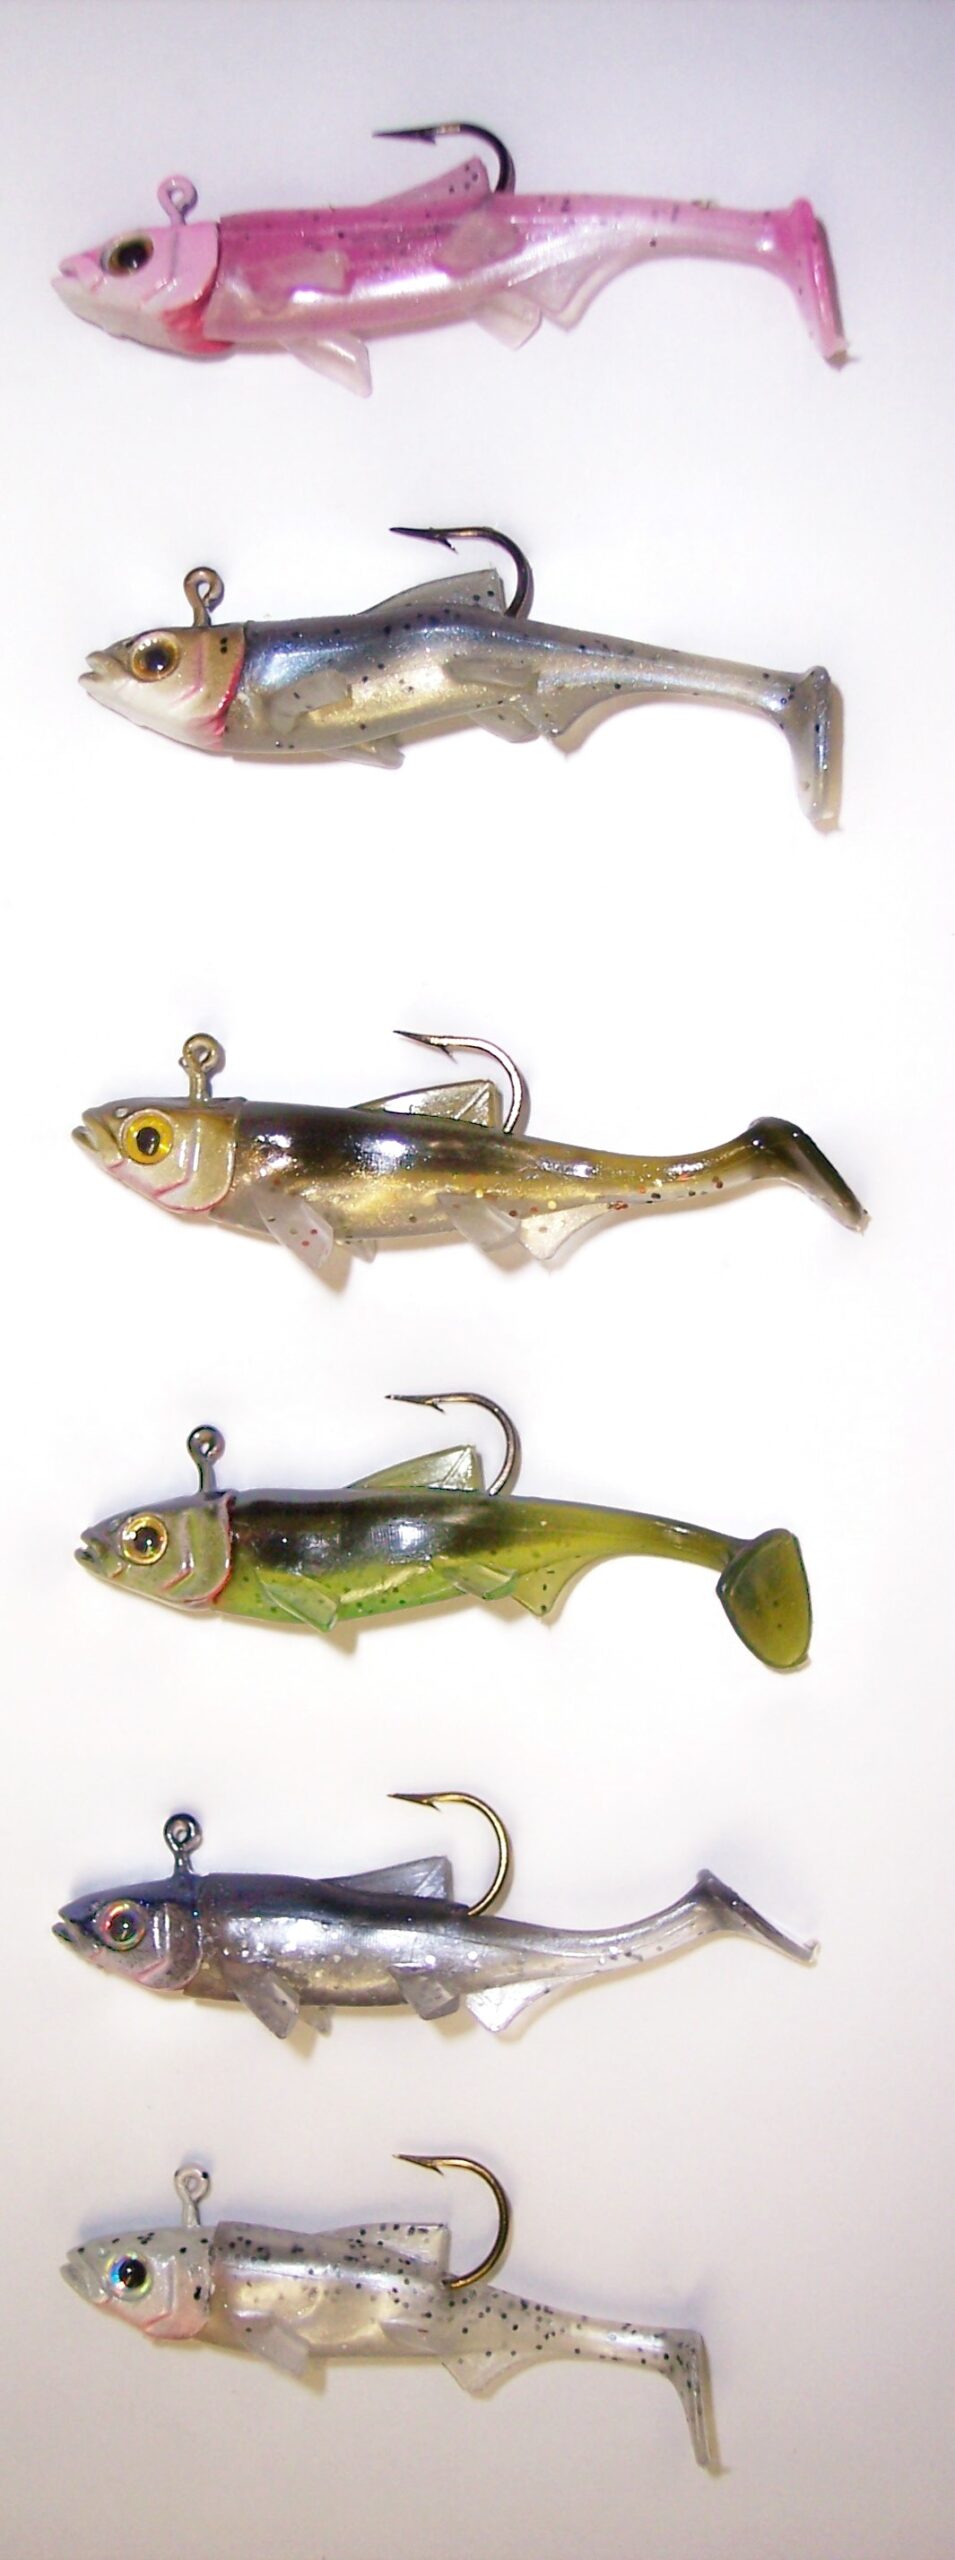 The 2” Pee Wee Swim trout Bait from Gitzit 